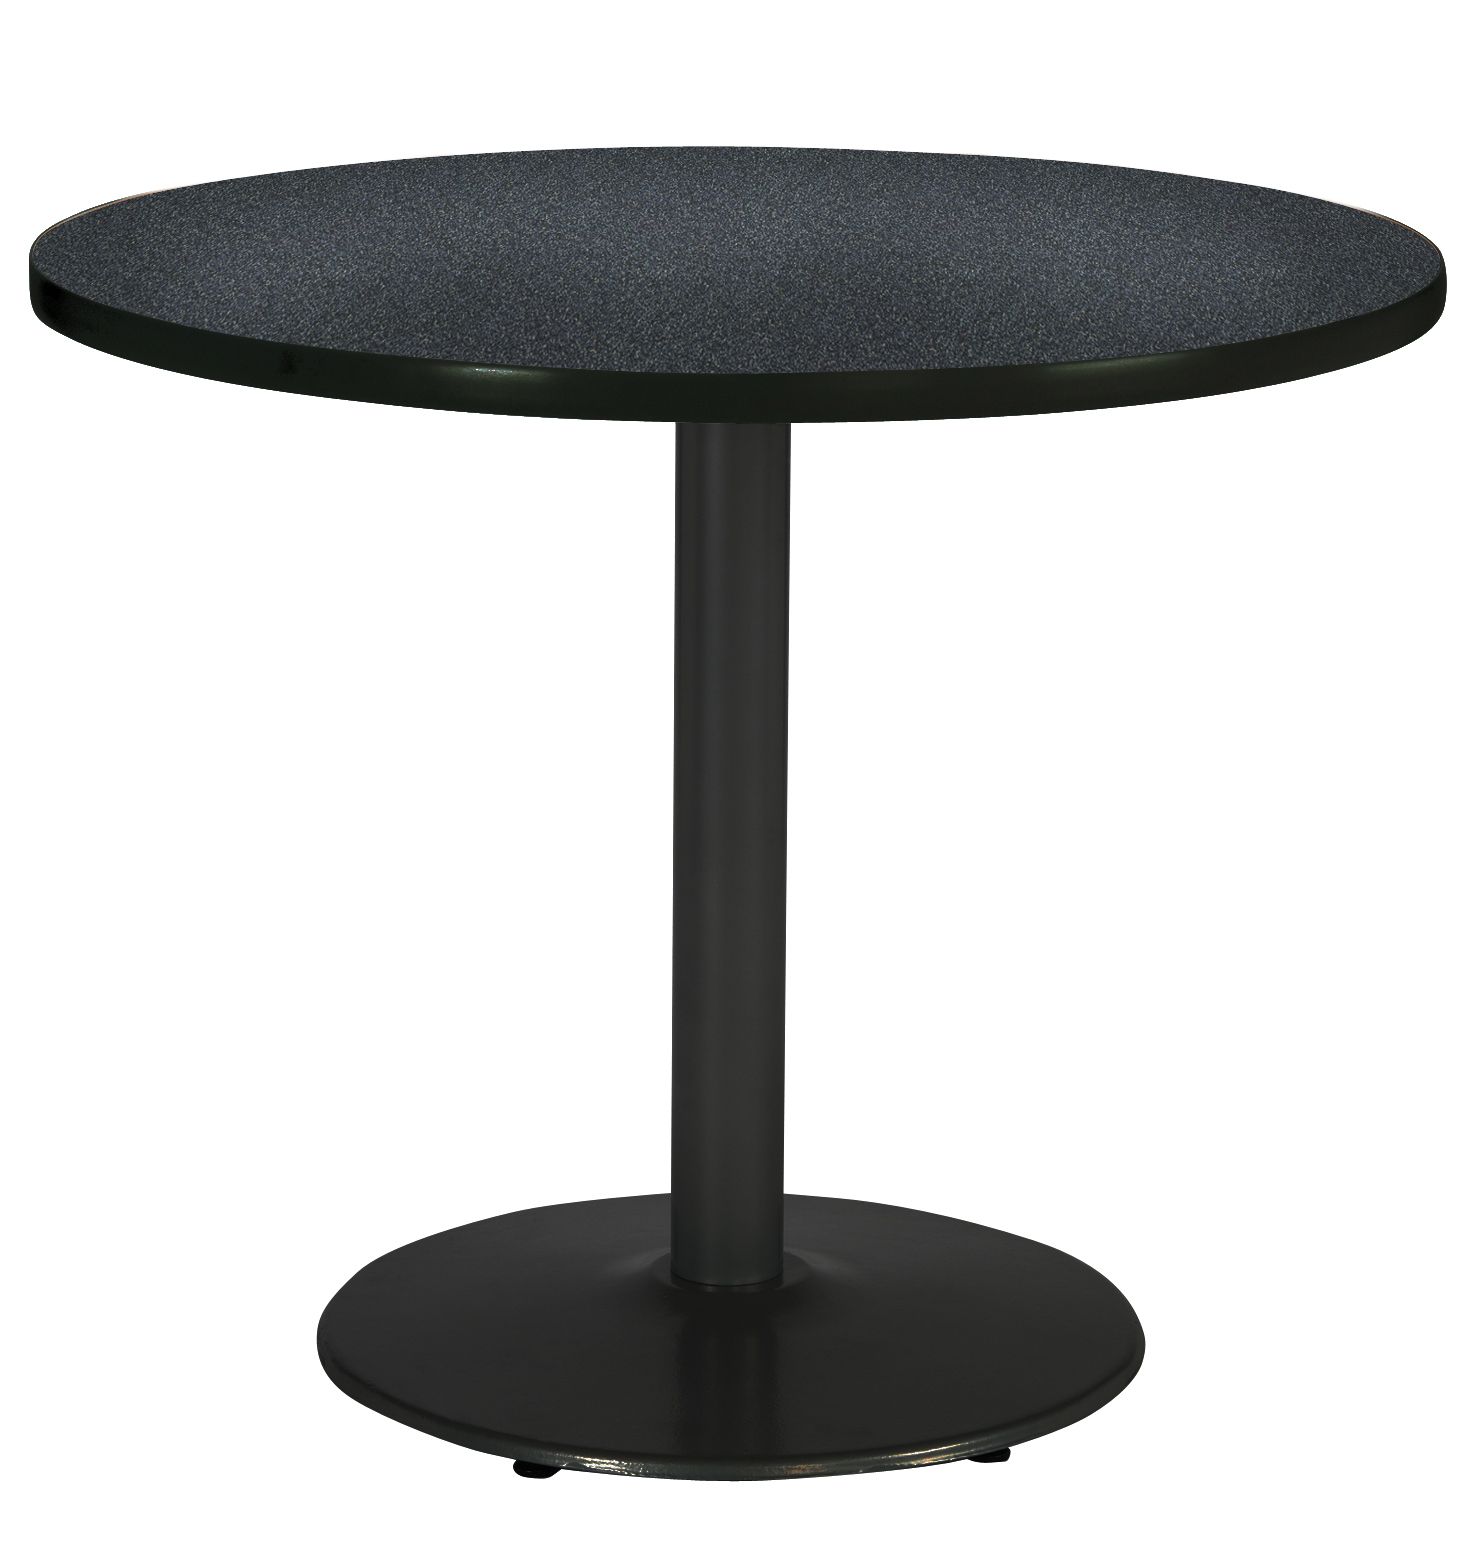 Mode Round Breakroom Tables Within Current Kfi Studios Mode 2.5' X Round' Dining Table, Graphite (Gallery 19 of 20)